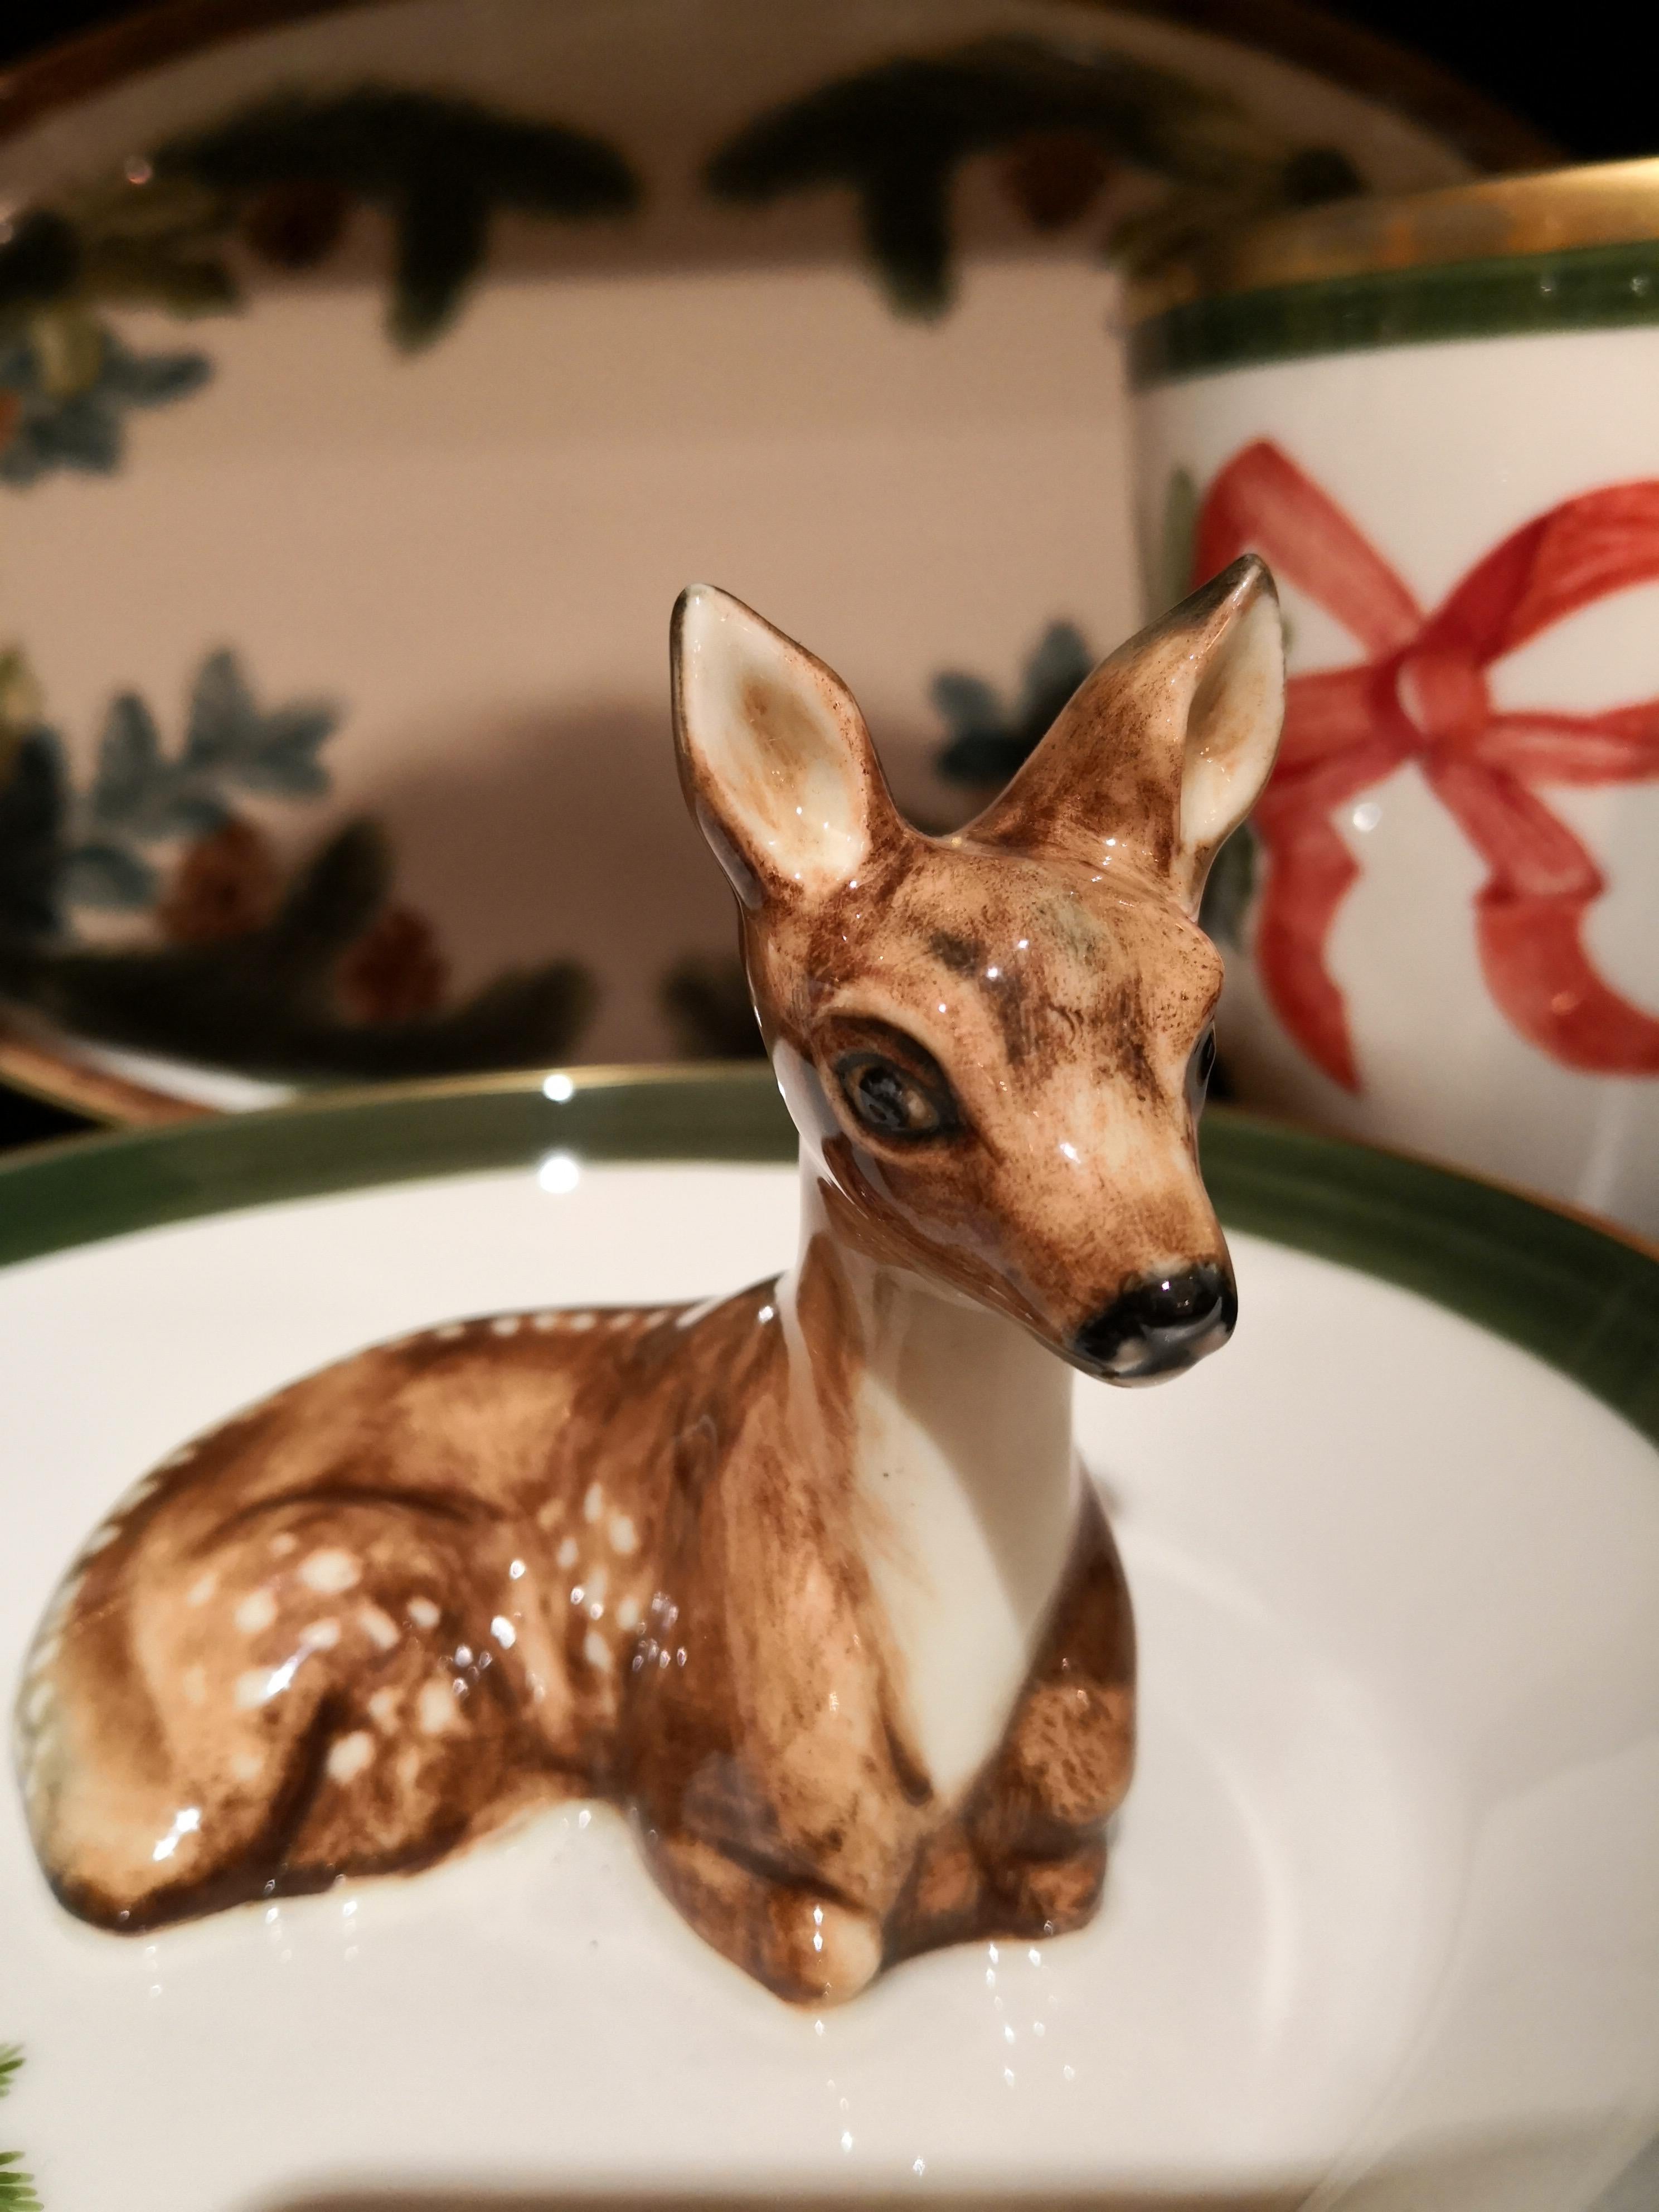 Completely handmade porcelain bowl in the style of black forest with a hands-free naturalistic painted bambi figure in brown. The bambi is sitting in the middle of the bowl for decorating nuts or sweets around. Rimmed with a fine 24-carat gold line.